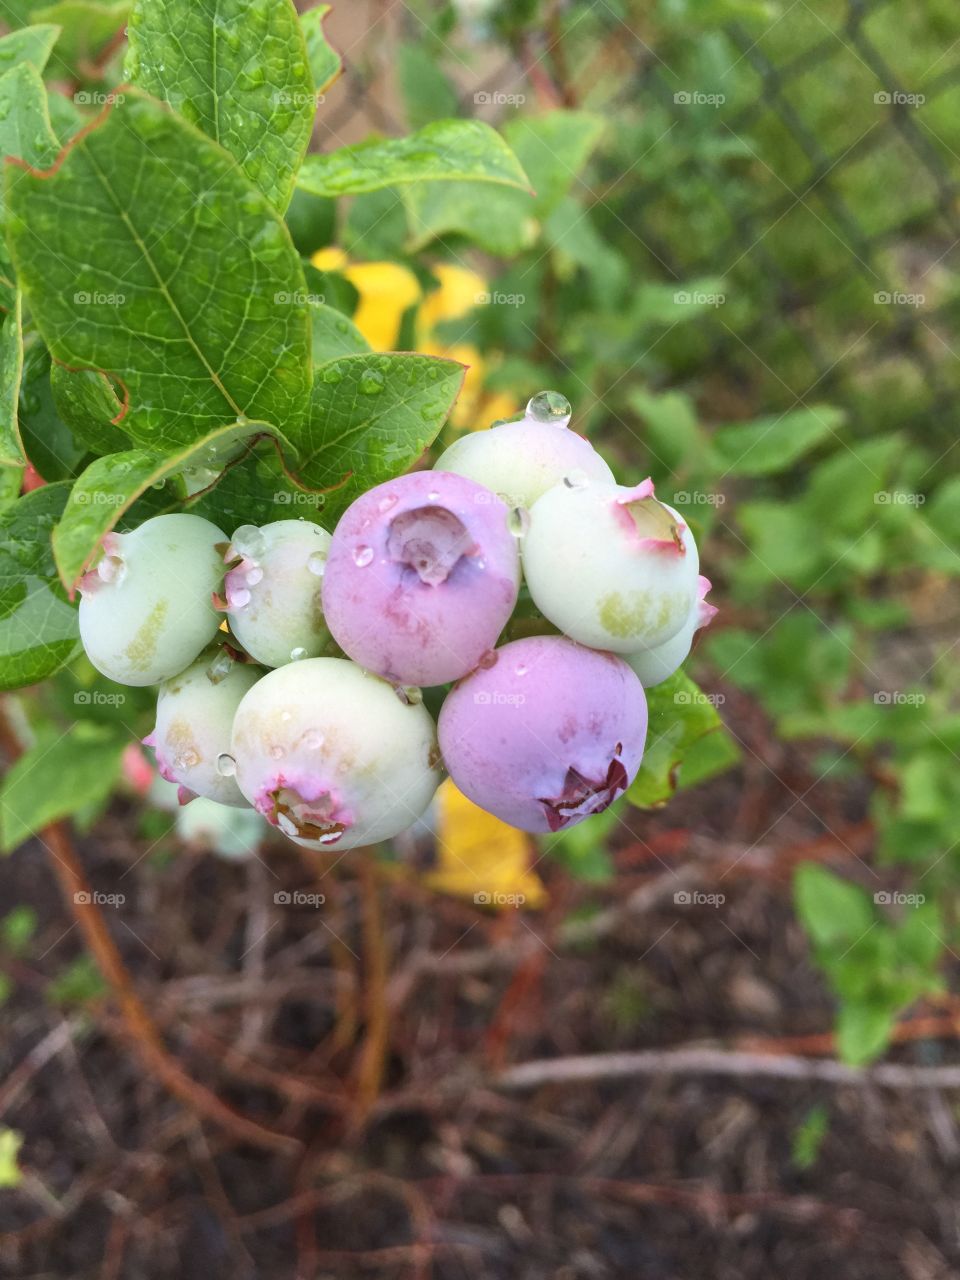 Blueberry Bunch. Blueberries growing with a light rain misting them.